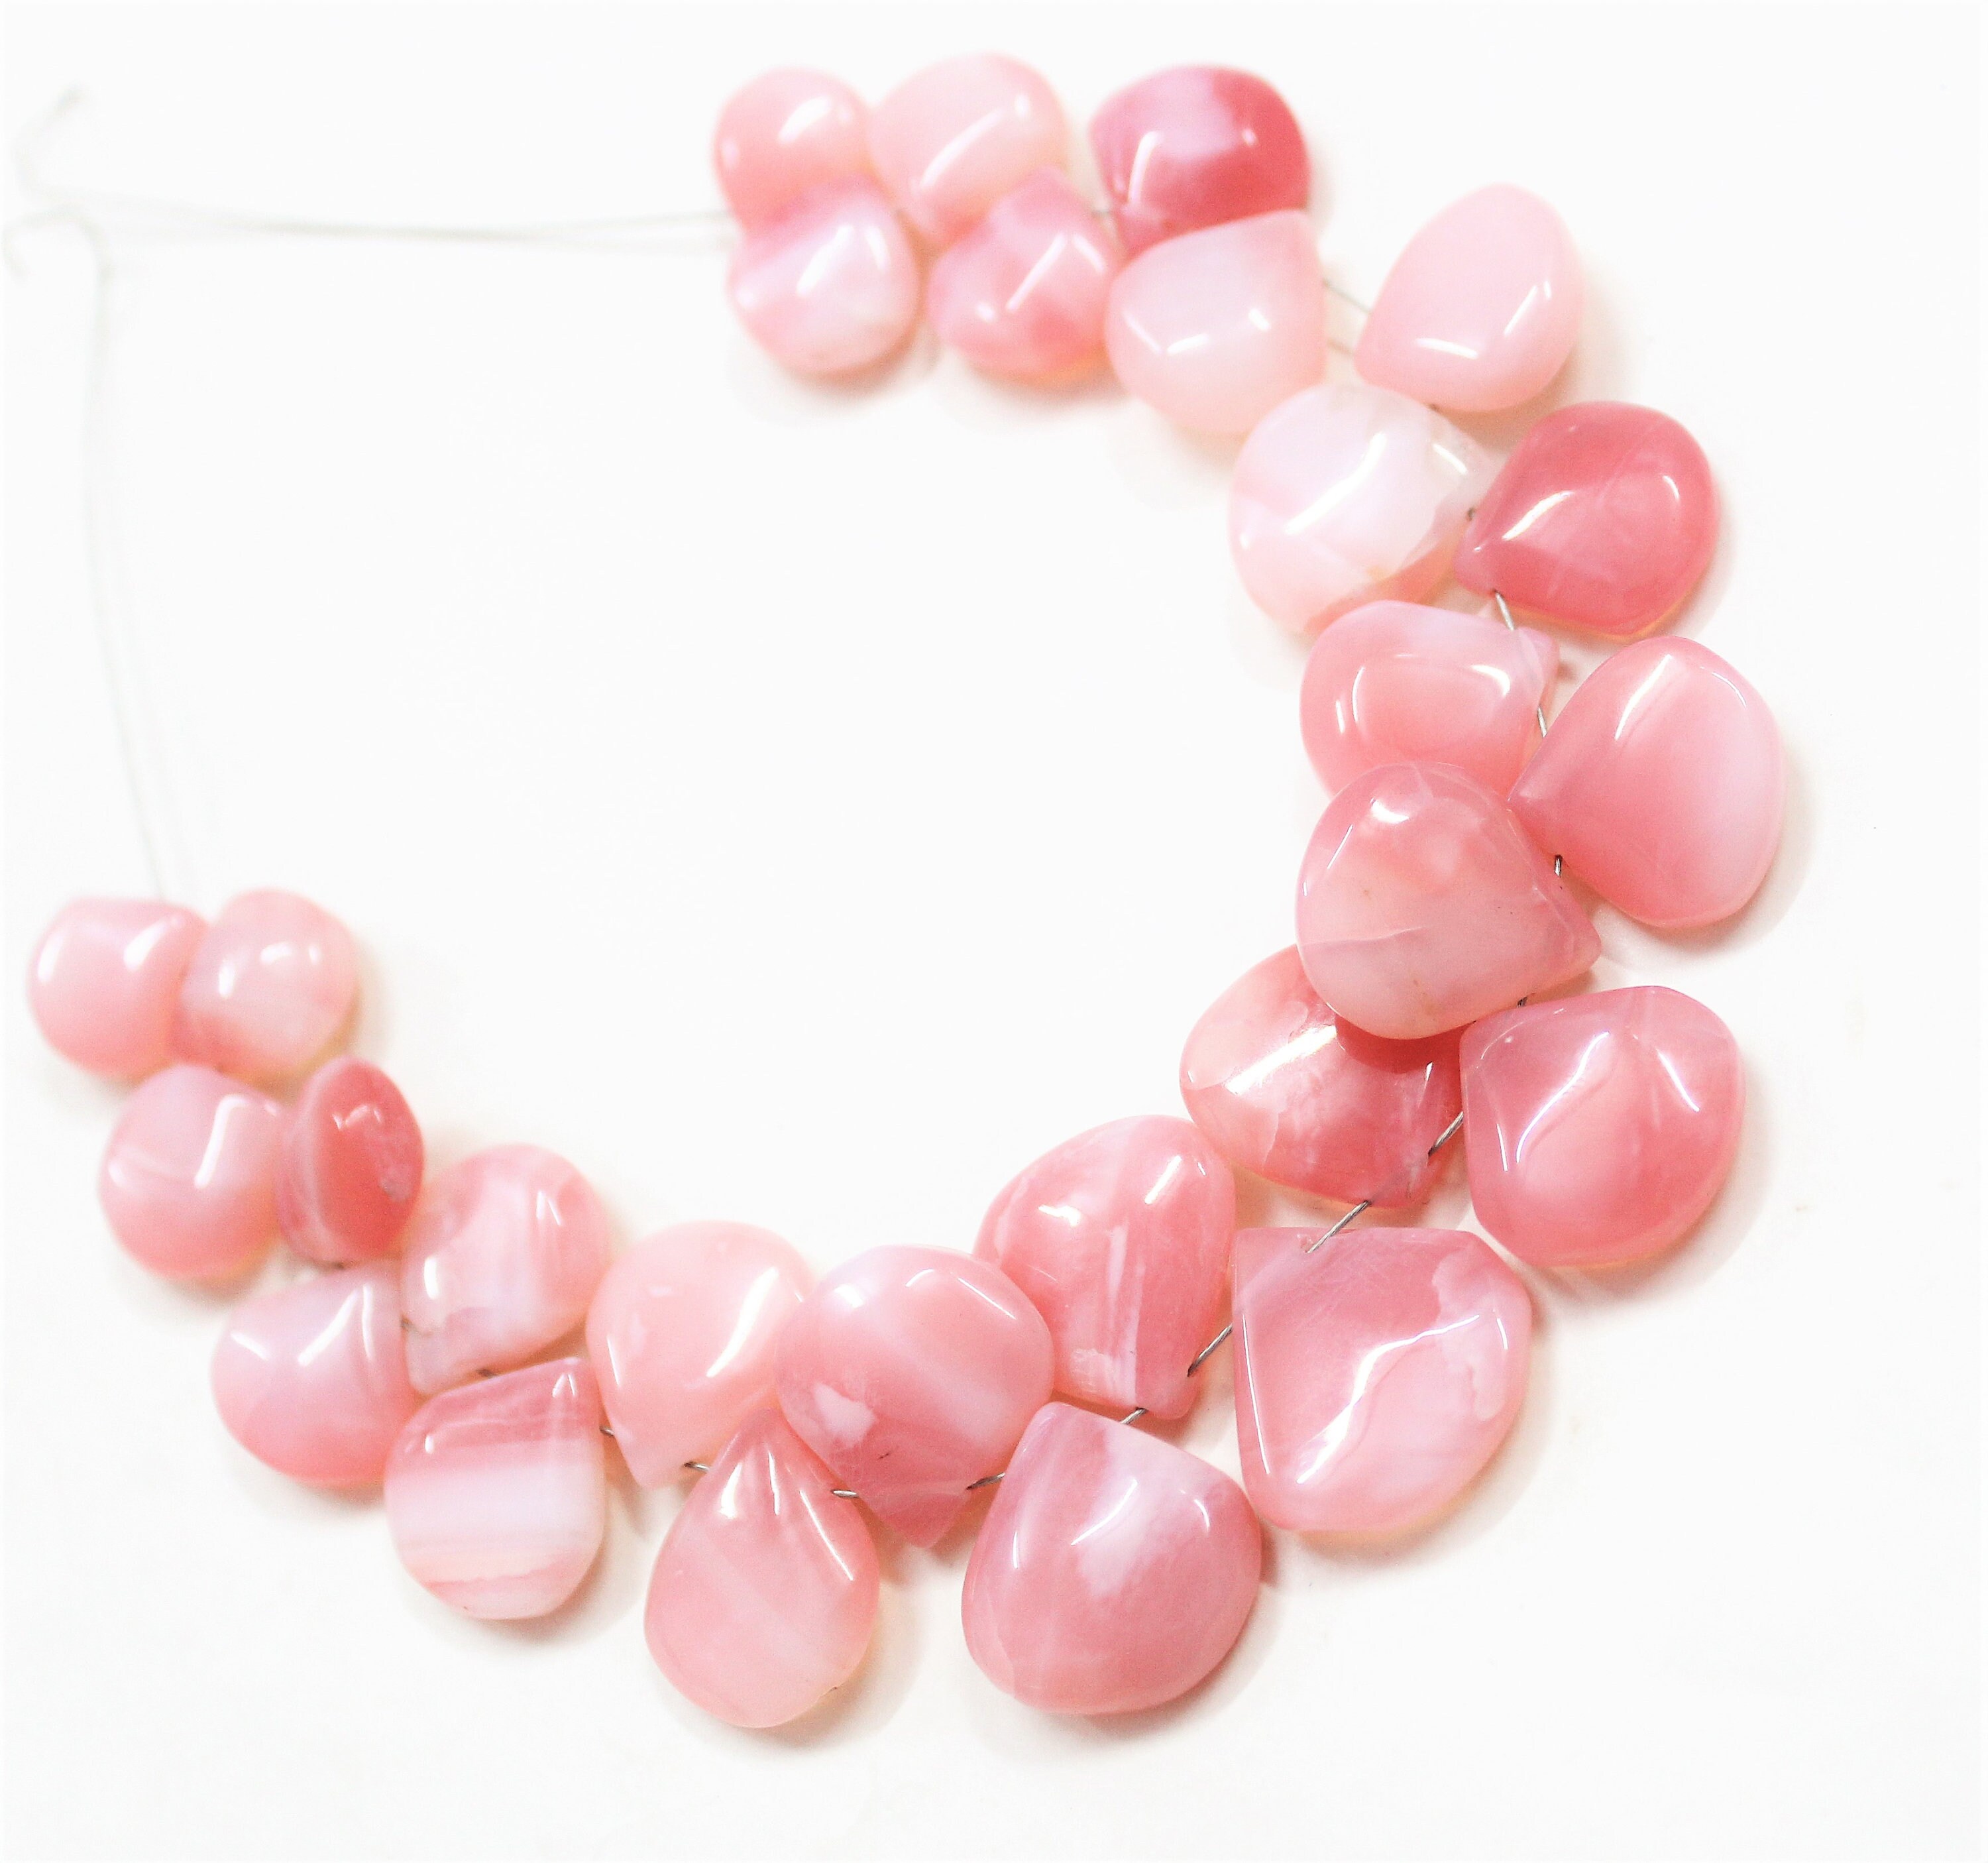 Natural Pink Opal Gemstone Beads 27 Carat Rose Pink Opal Gemstone Beads Heart Shape Beads Stone Jewelry Making Stone Gift for Her